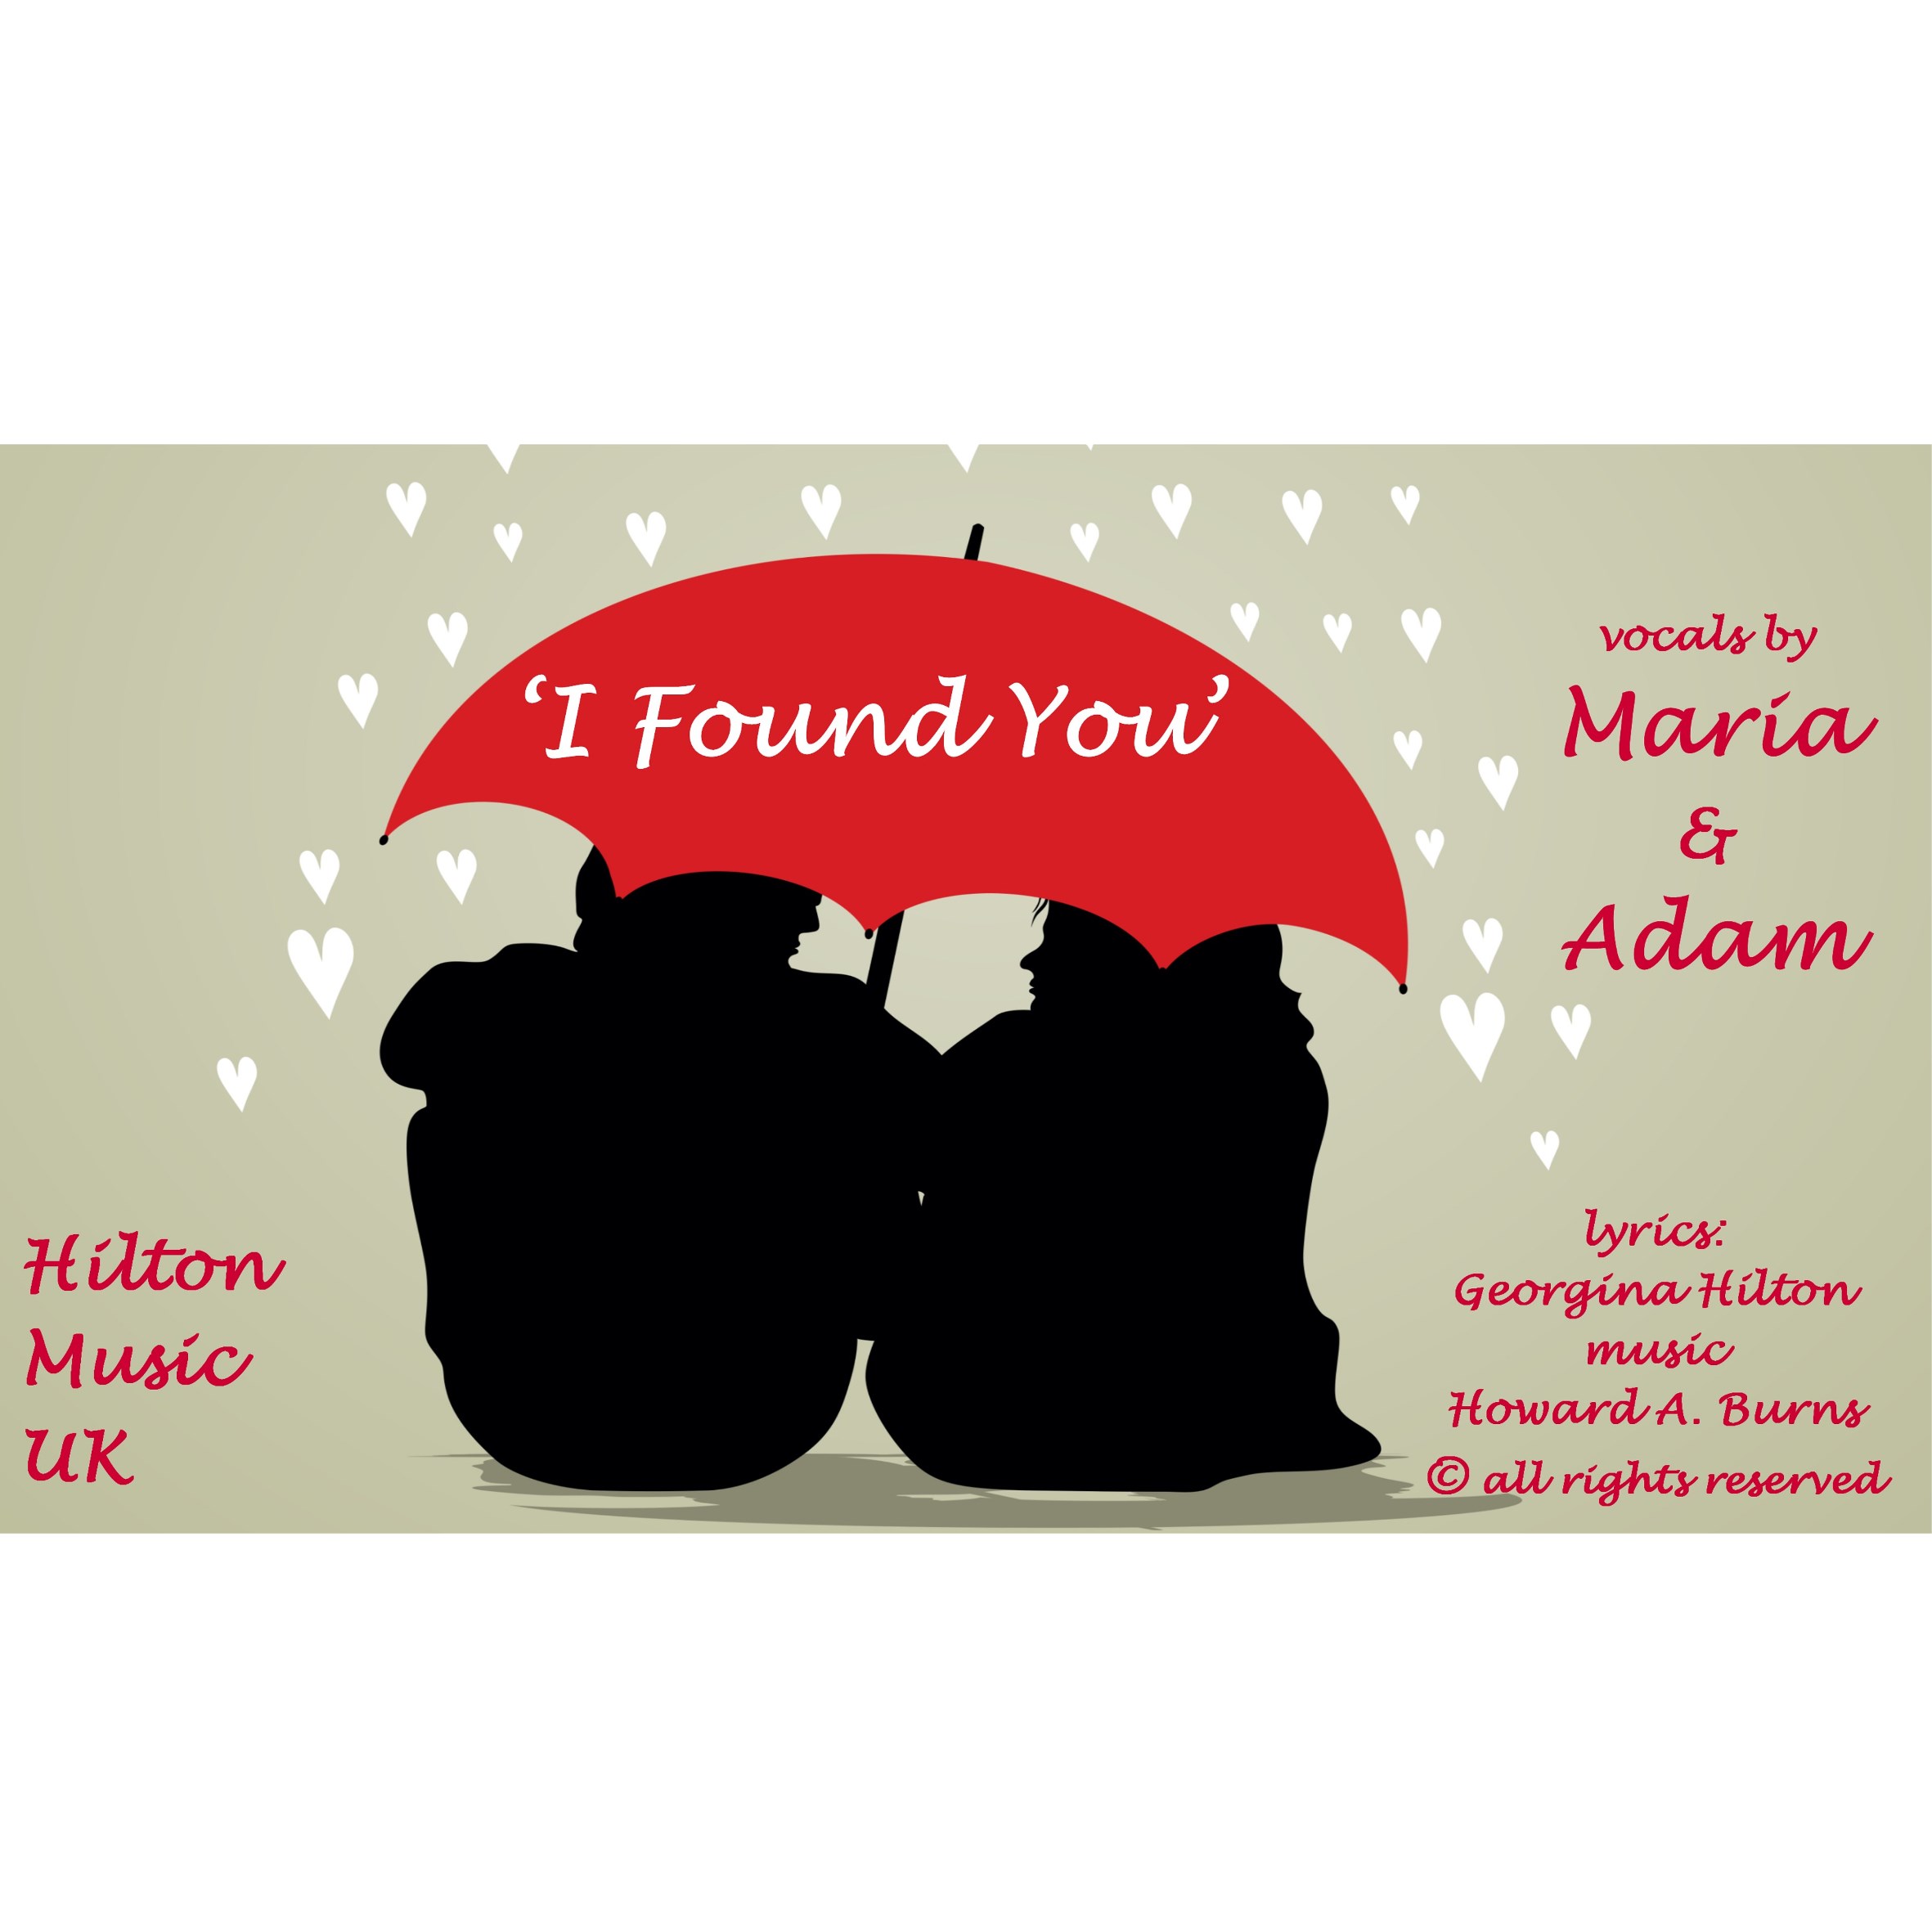 'I FOUND YOU' is a duet love song for that Special Day, easy listening from Hilton Music UK